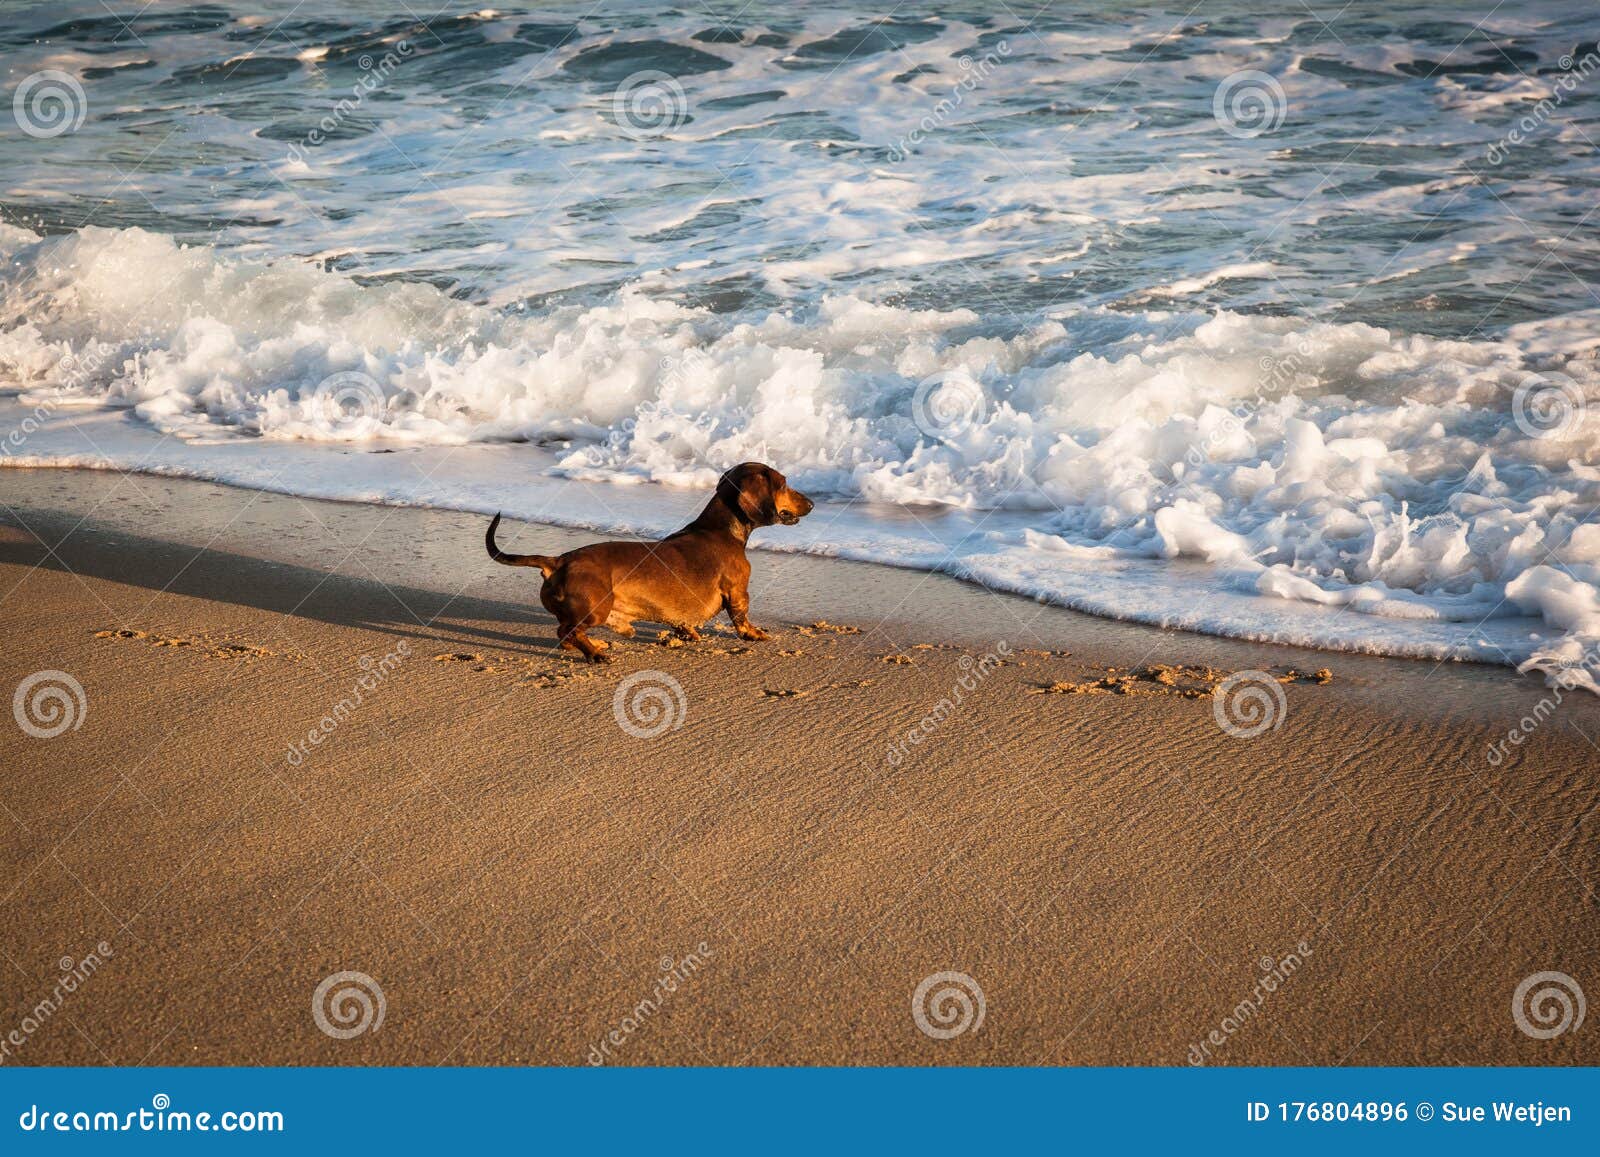 Dachshund Dog Playing with Breaking Waves on a Sunny Beach Stock Photo